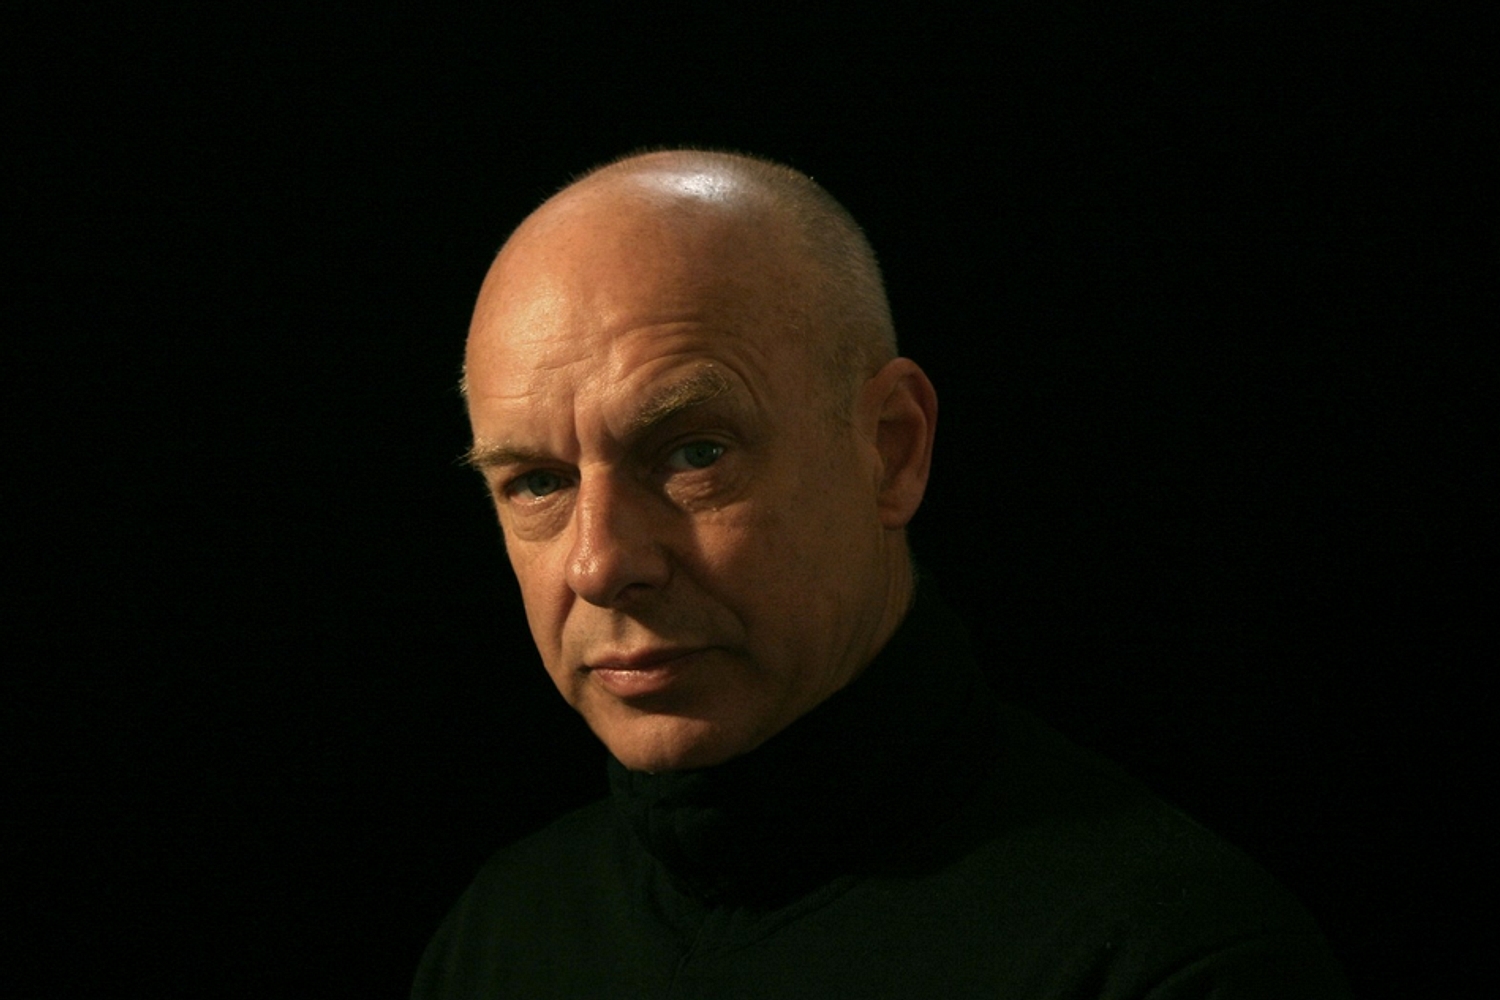 Brian Eno announces ‘Reflection’ album, out New Year’s Day